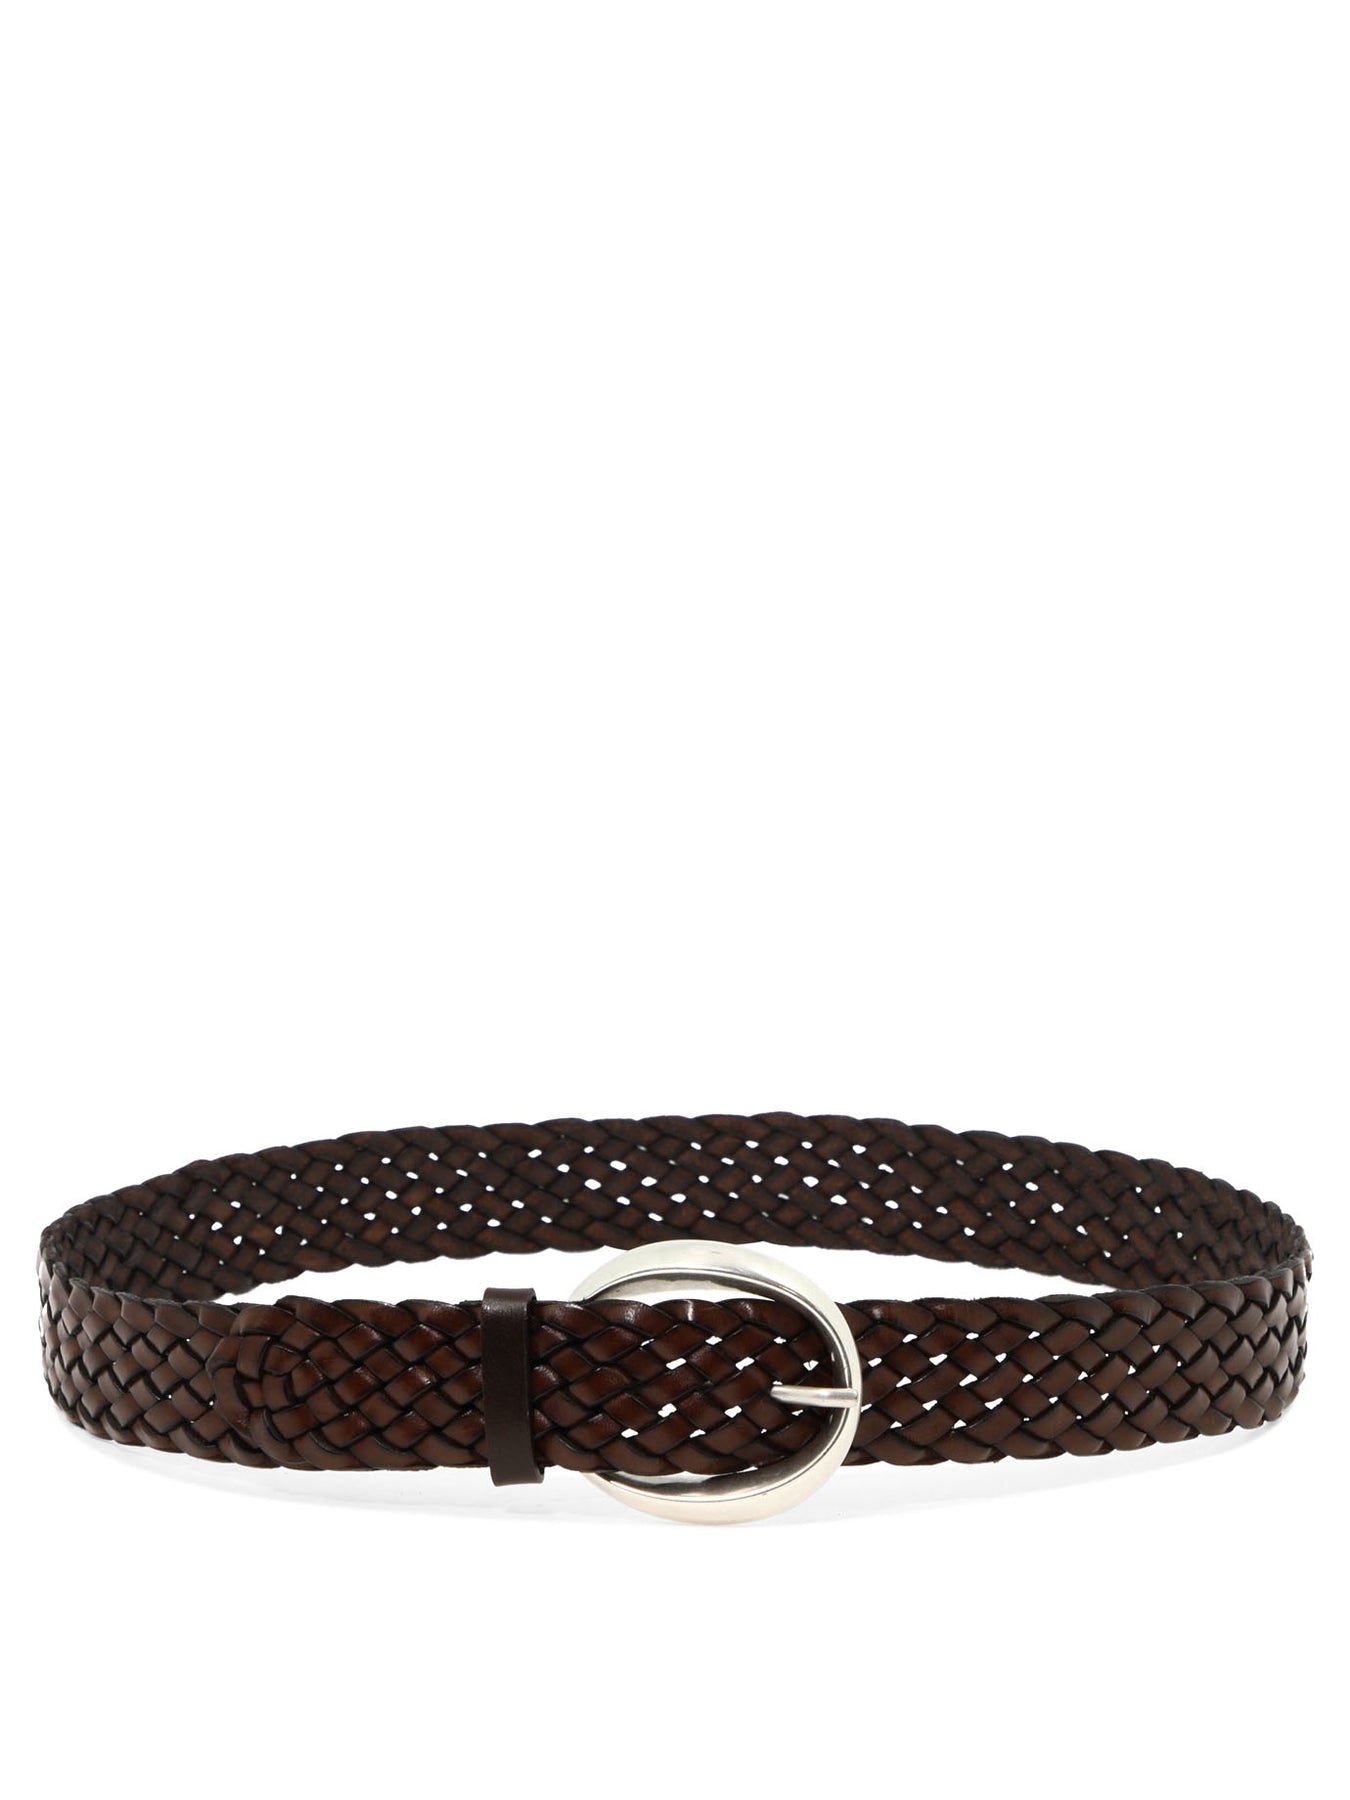 ORCIANI Masculine braided leather belt 2,5 cm. , color Brown